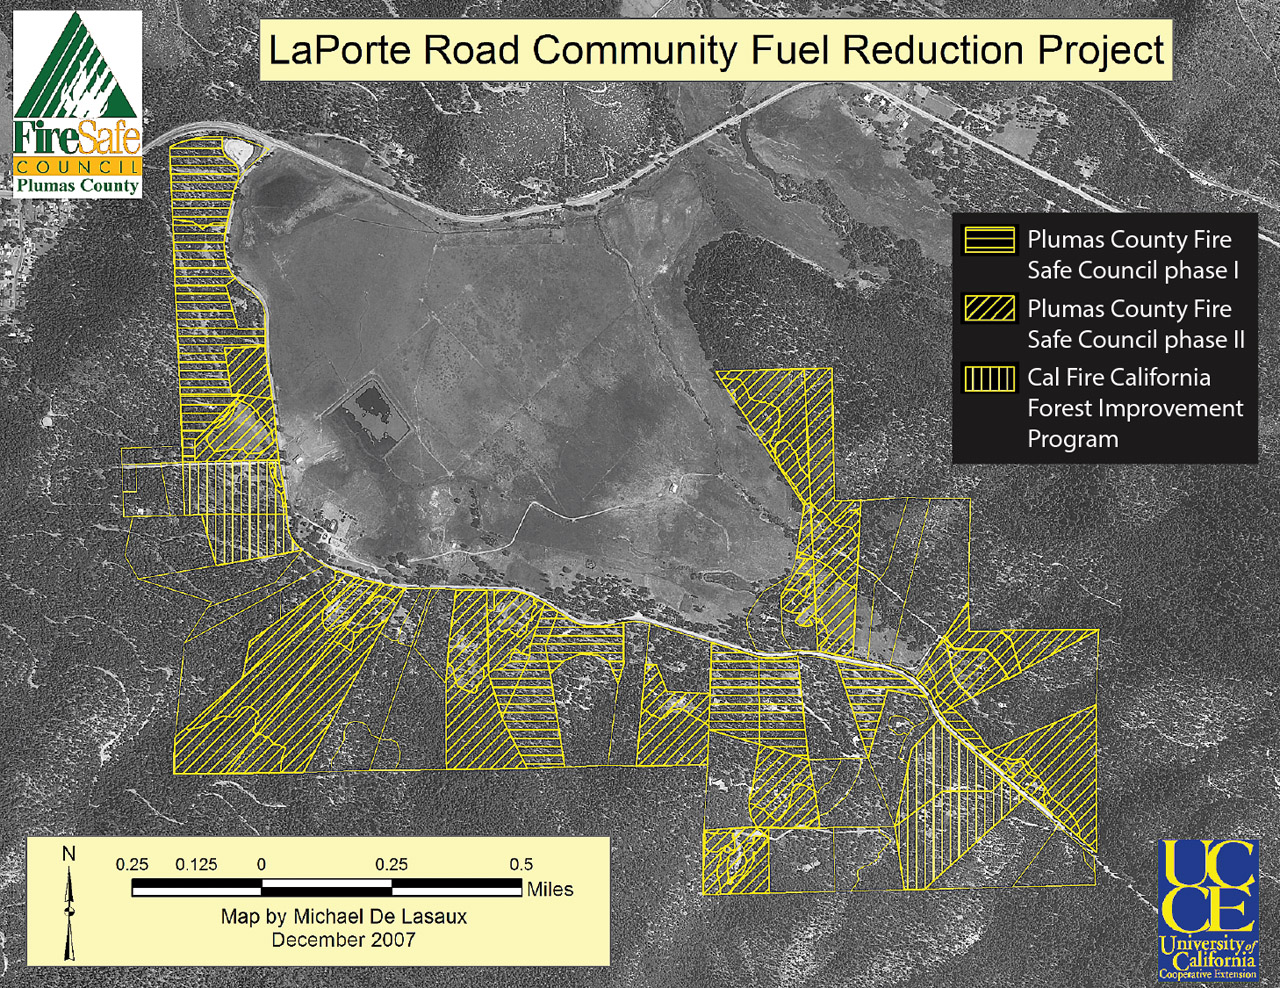 La Porte Road community fuel reduction map, in Plumas County, showing significant homeowner participation in the project.